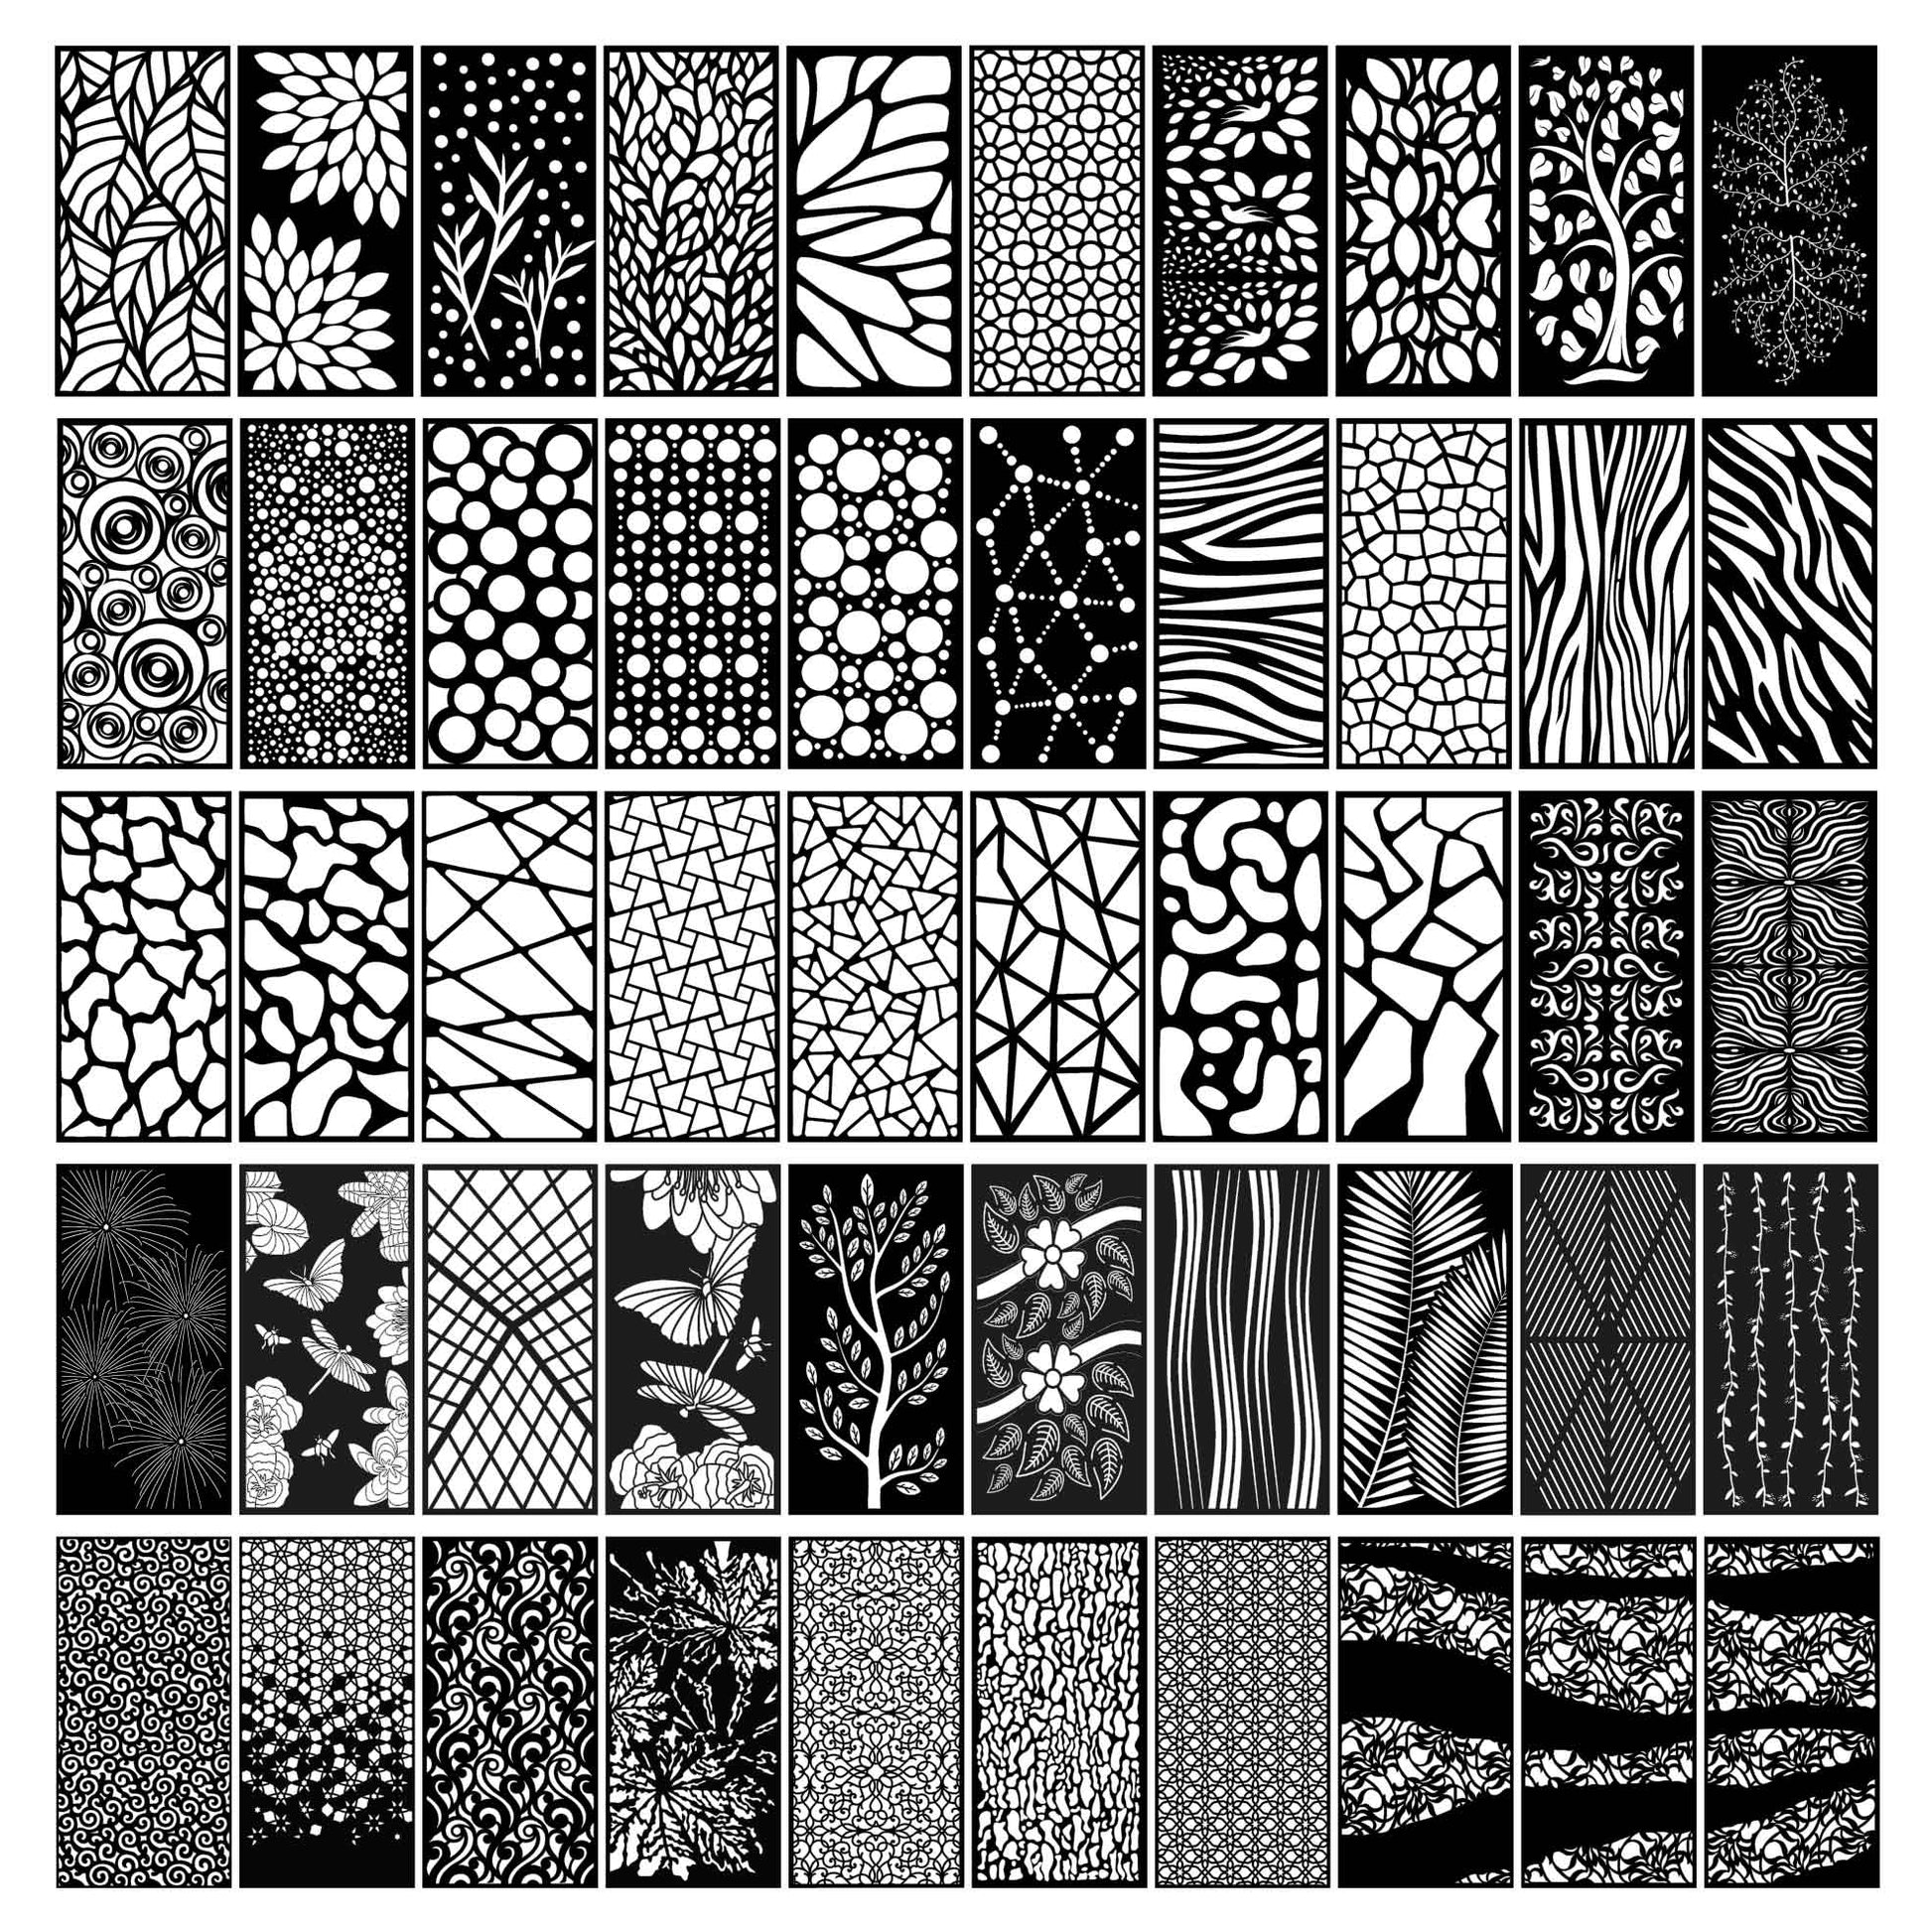 Abstract and Floral Decorative Privacy Screen Panels Doors or Fence dxf files